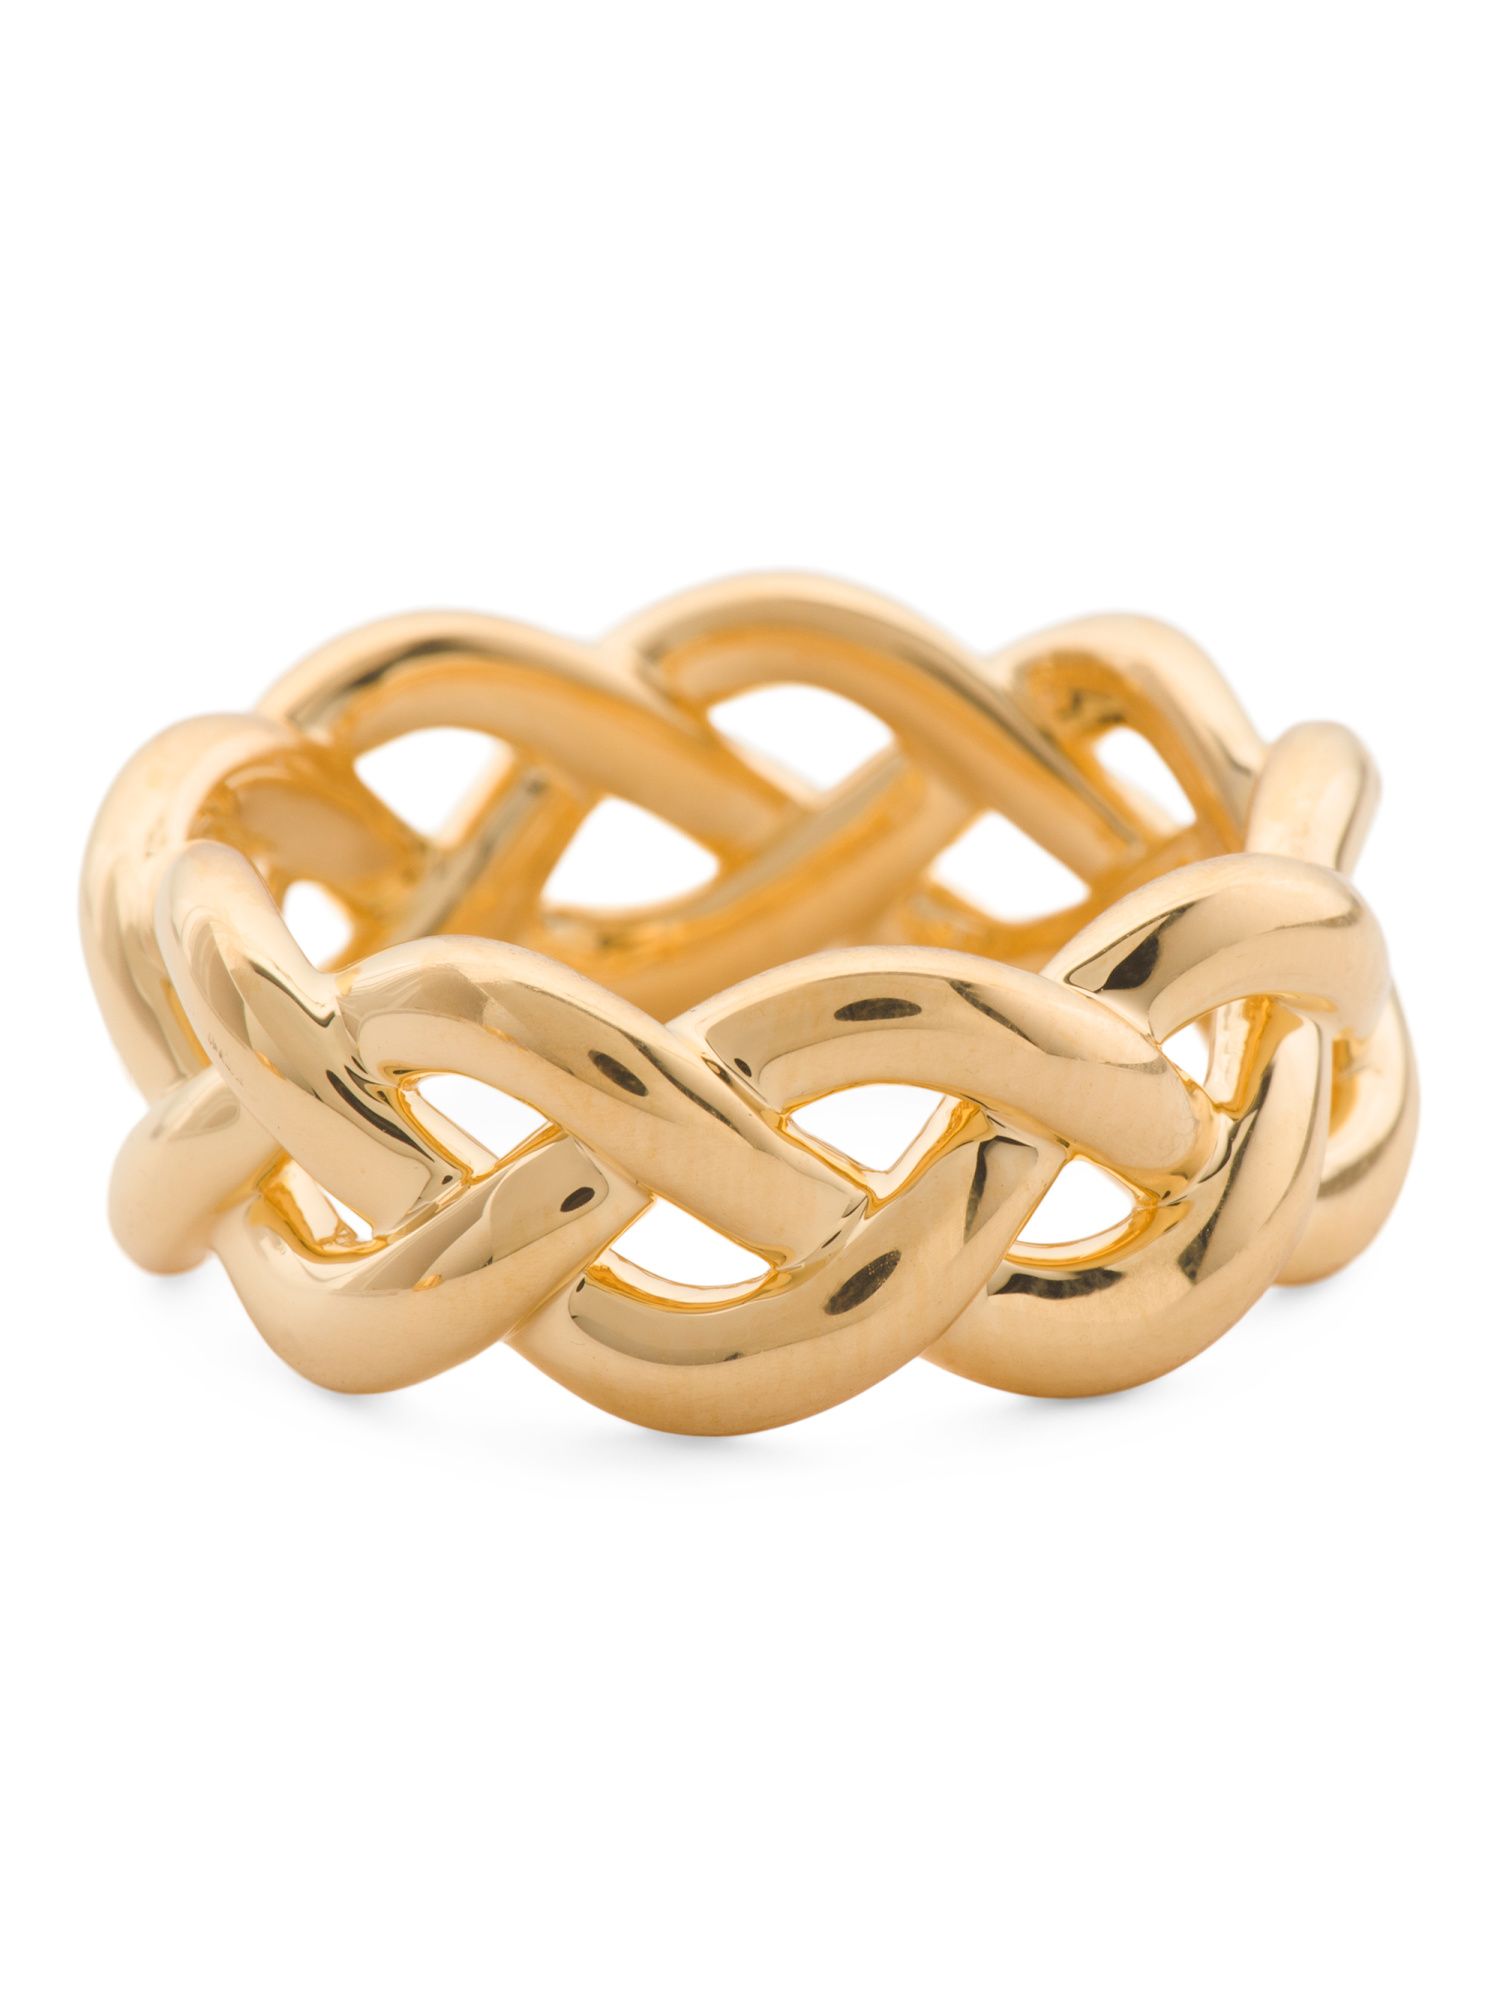 Made In Italy 14k Gold Braided Ring | TJ Maxx